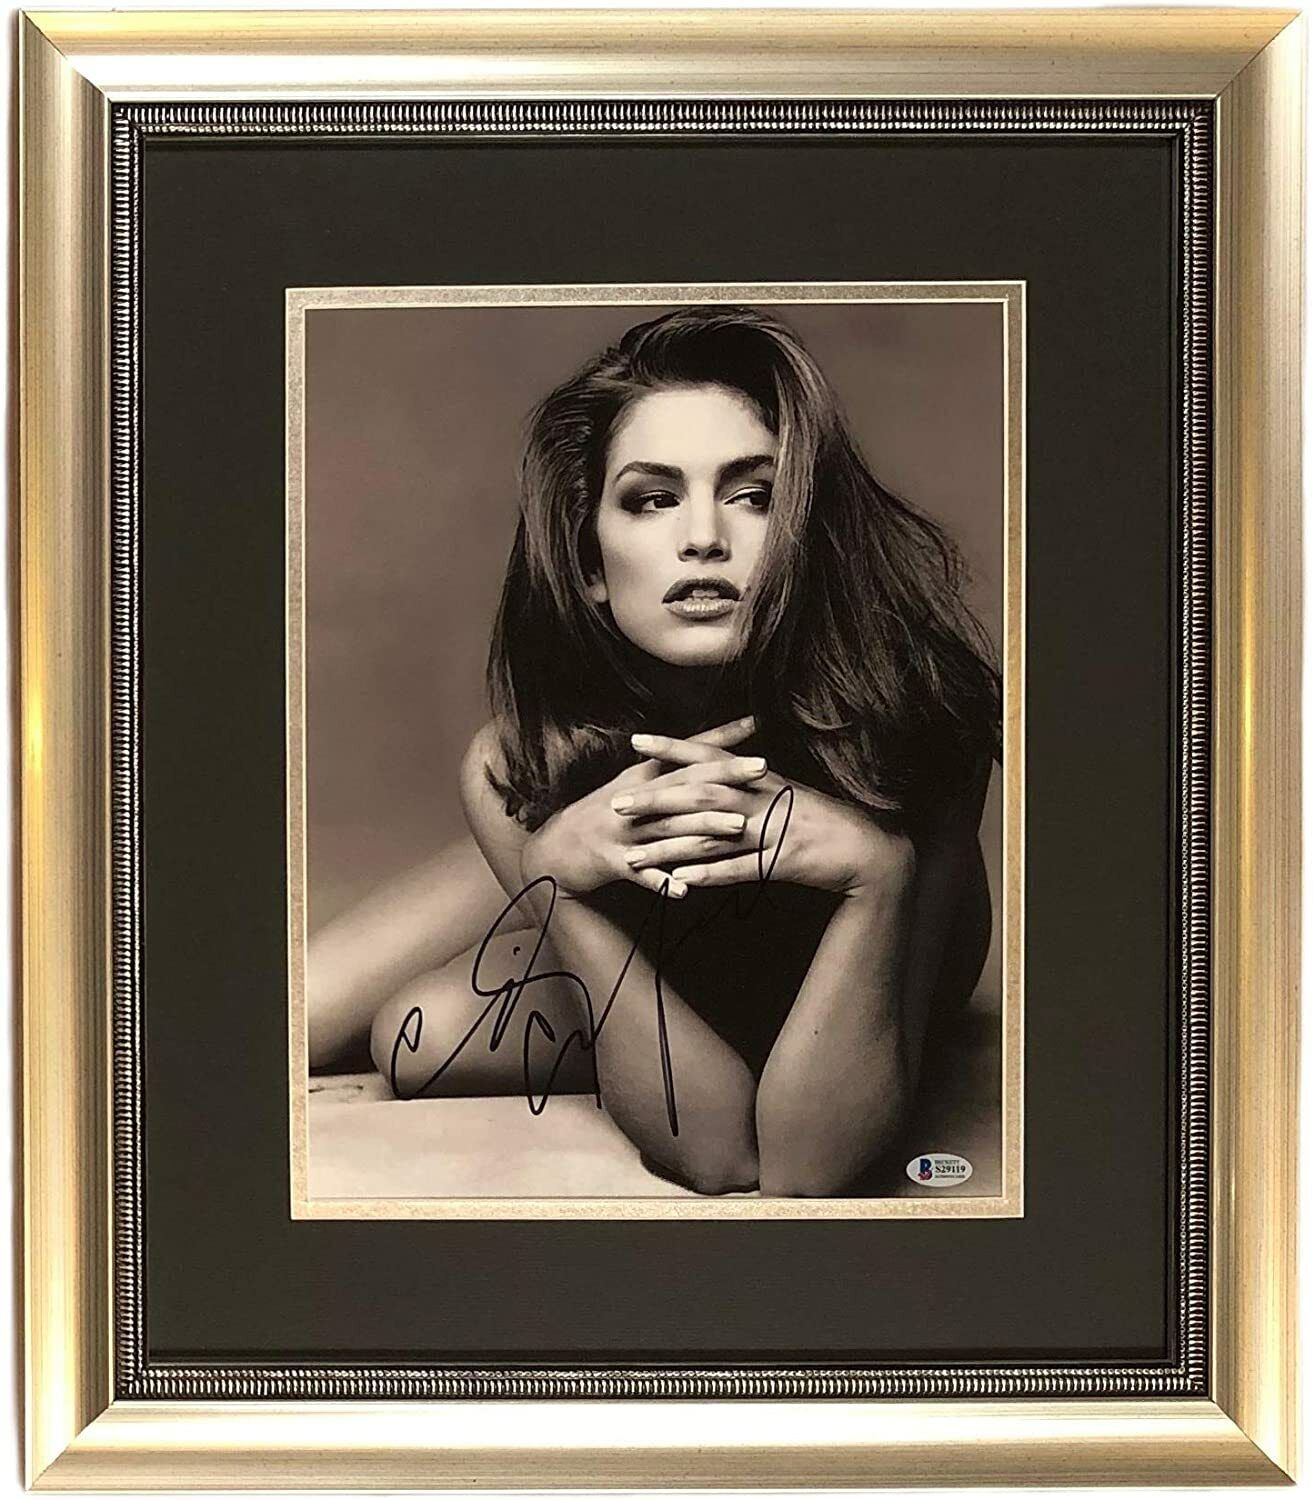 CINDY CRAWFORD Autographed Hand SIGNED 11x14 Photo Poster painting FRAMED BECKETT BAS BEAUTIFUL!